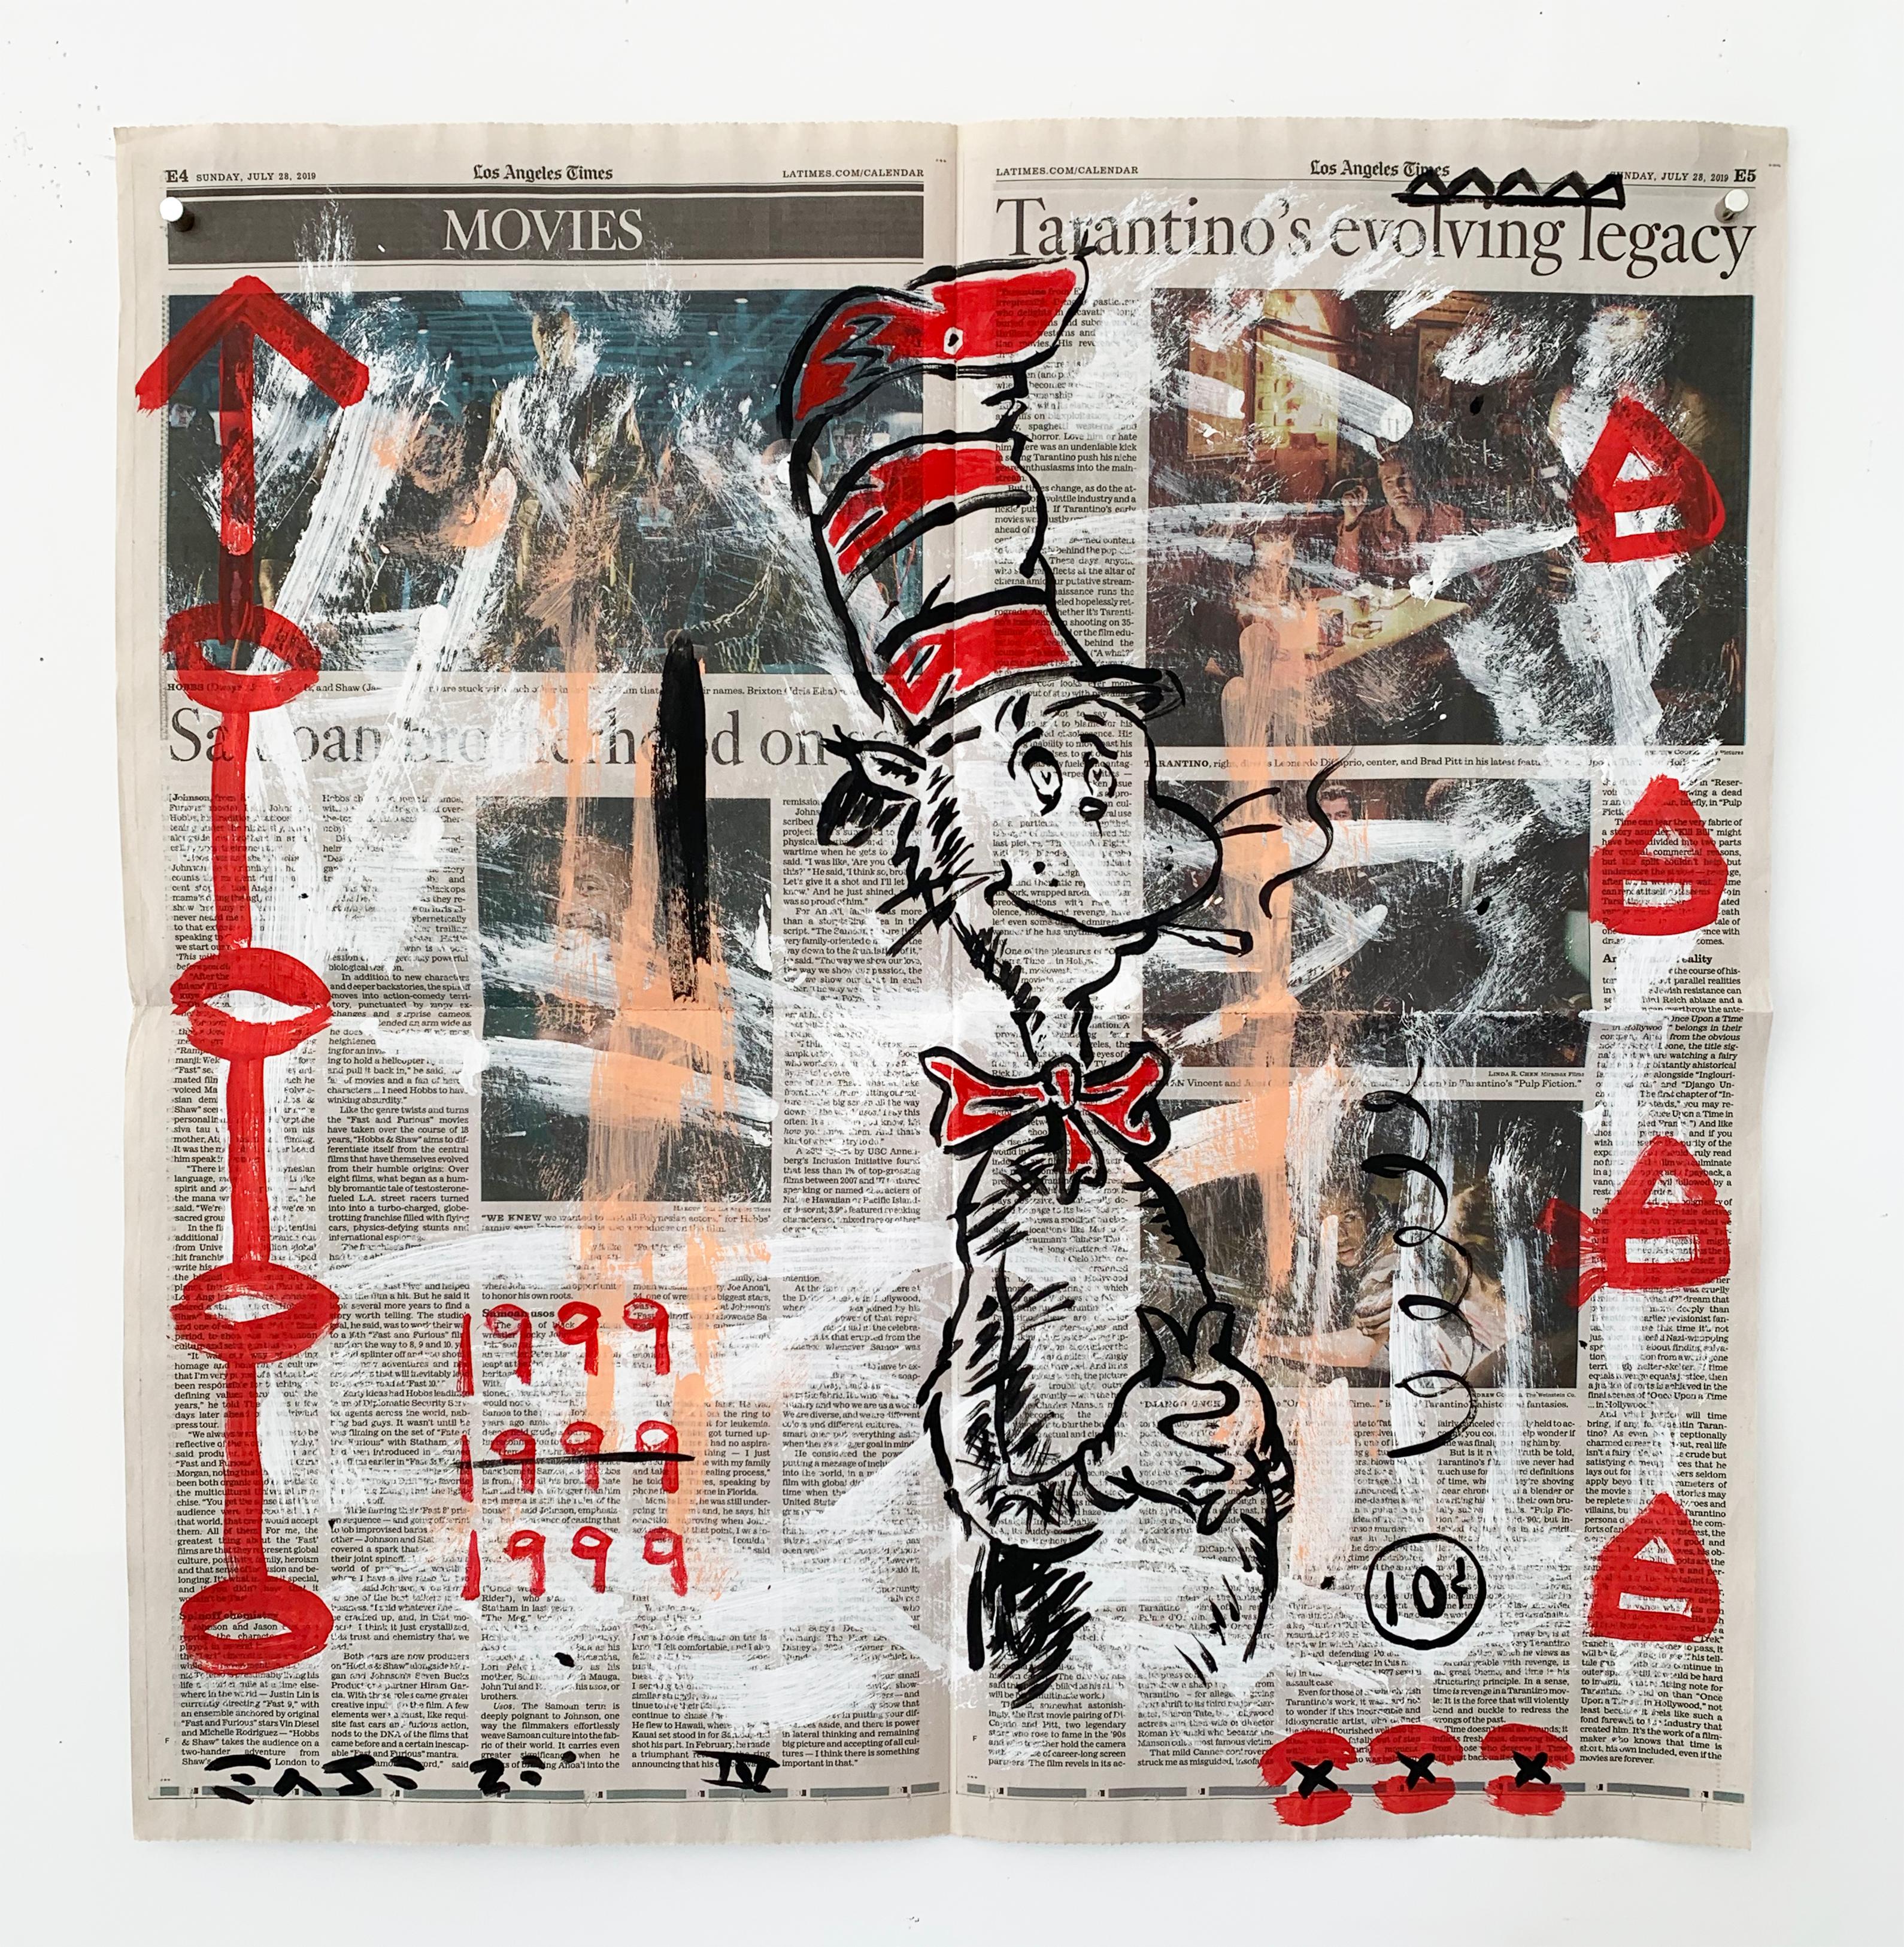 Gary John Figurative Print - "Dr. Suess" Acrylic and Collage on Los Angeles newsprint